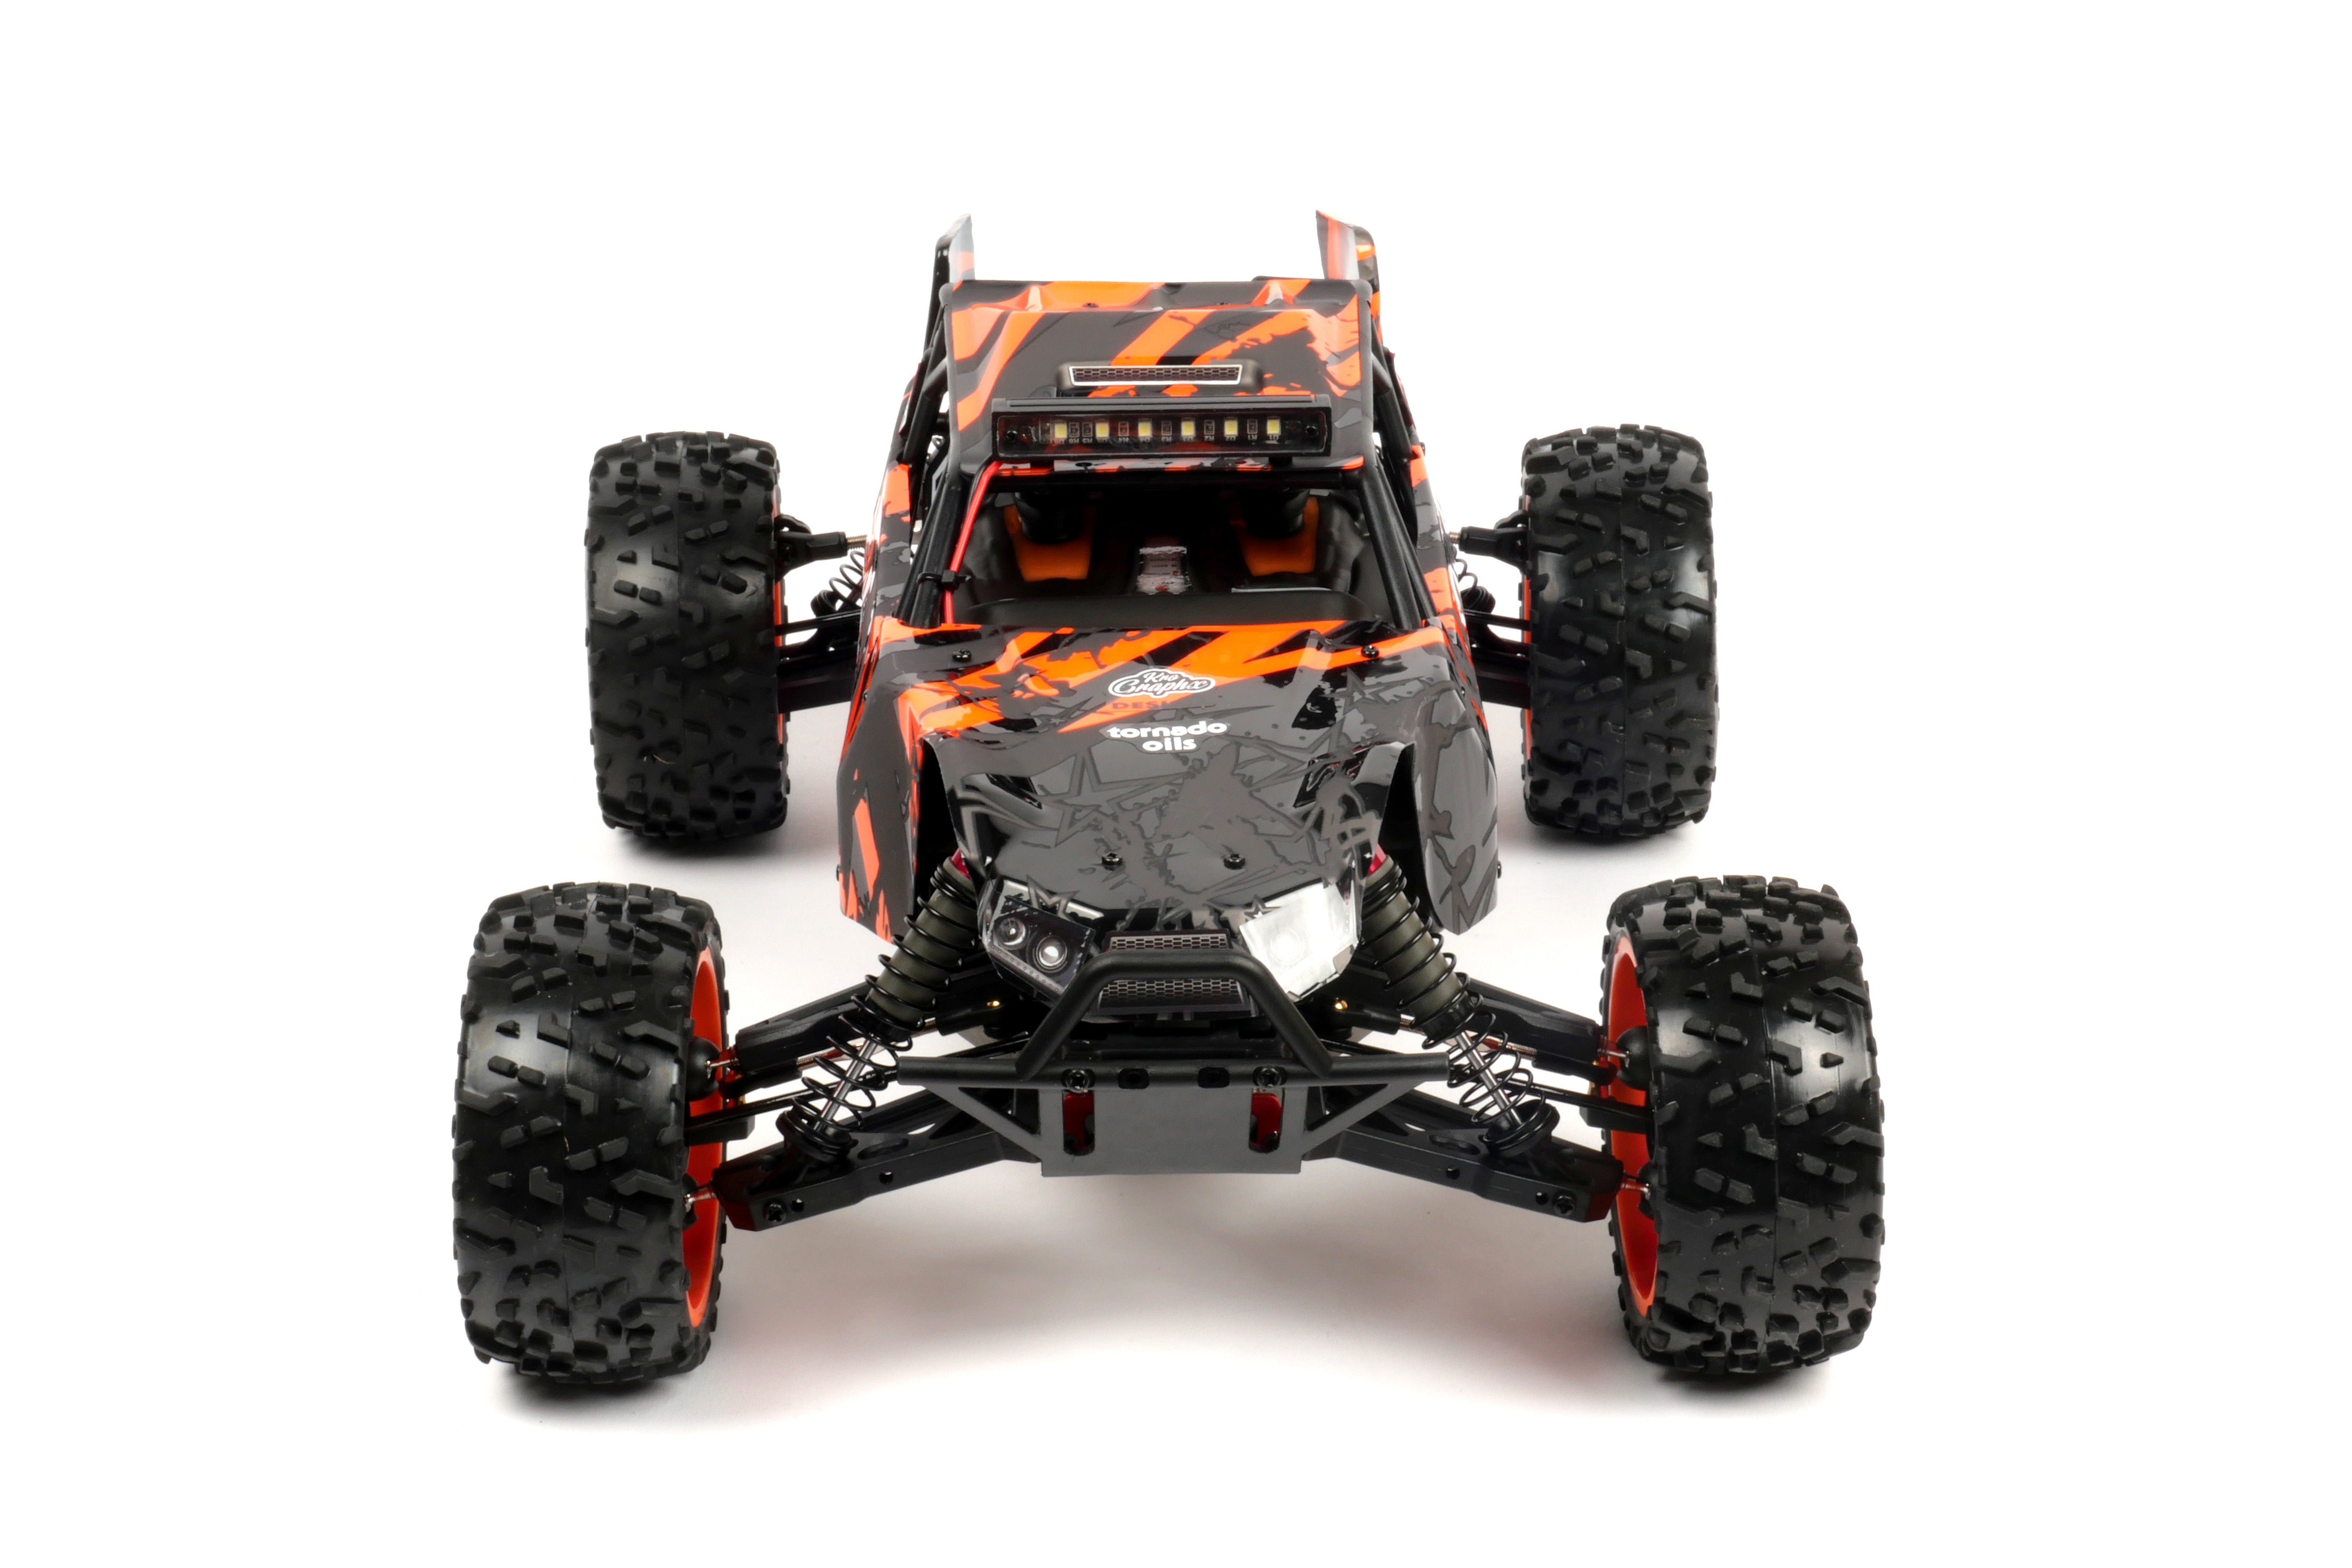 T2M Racing Buggy Pirate XT-C RTR T4972